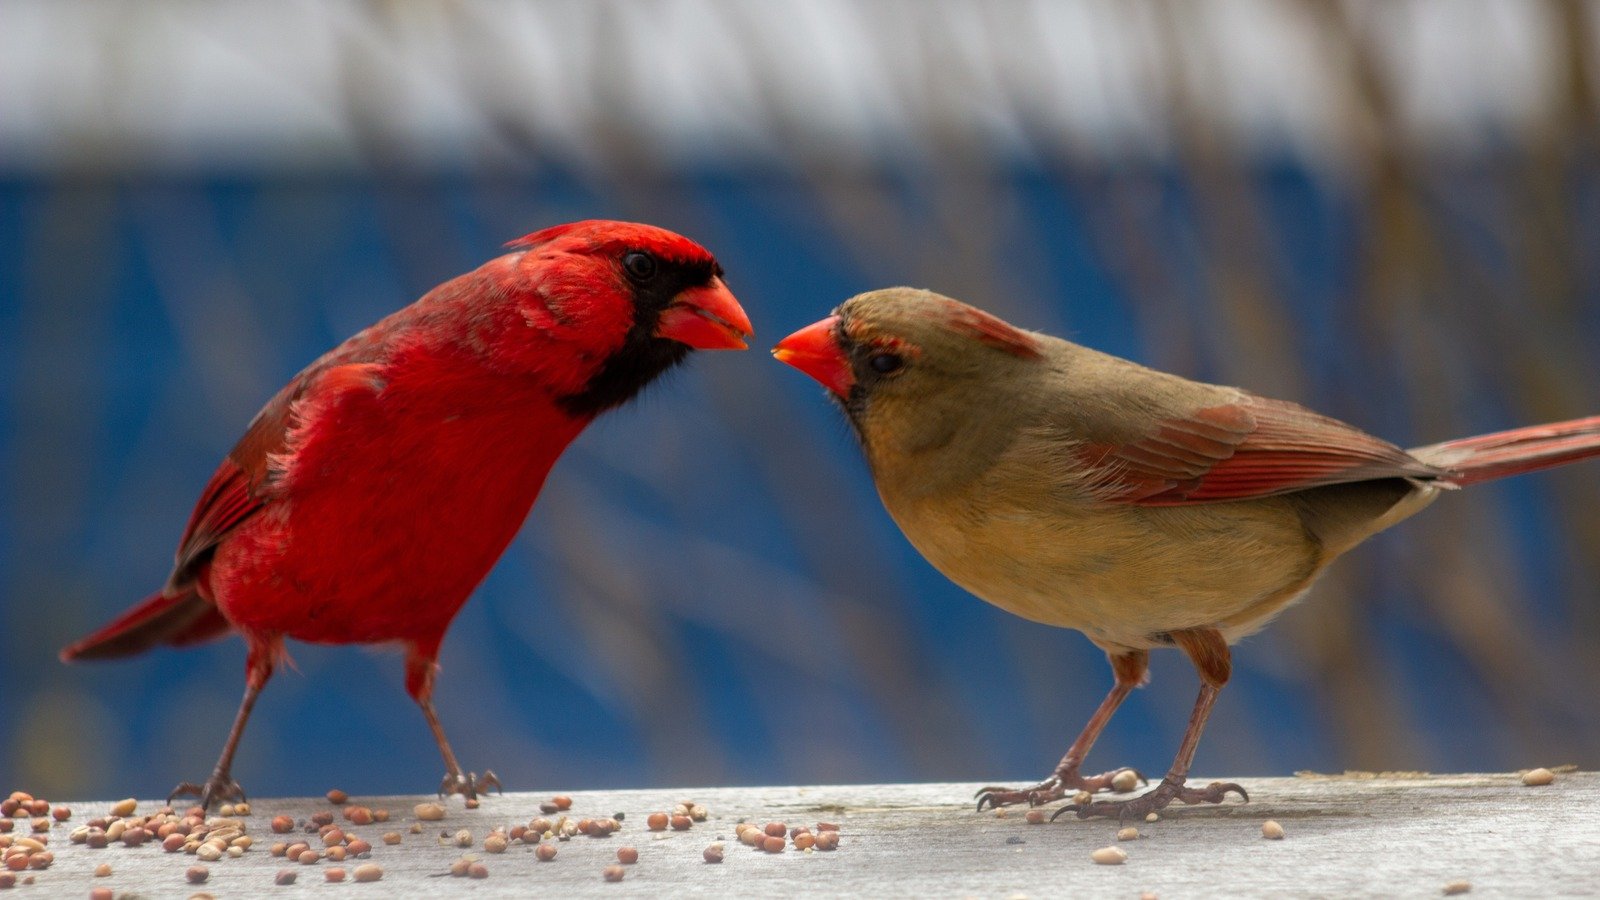 The Best Types Of Bird Feeders For Cardinals